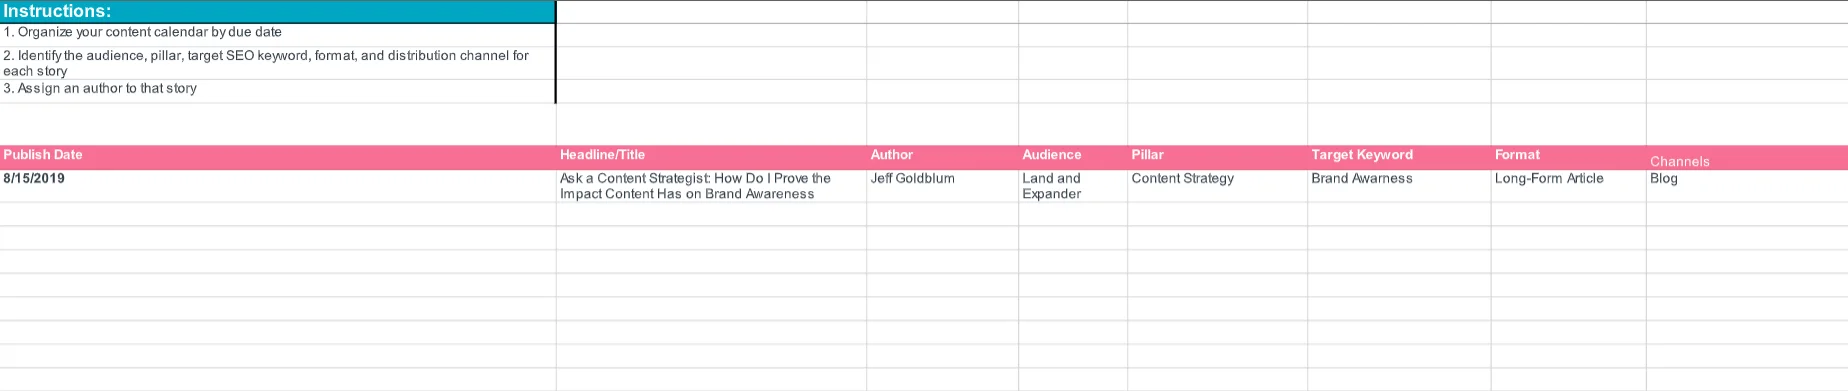 Contently's Content Calendar Template